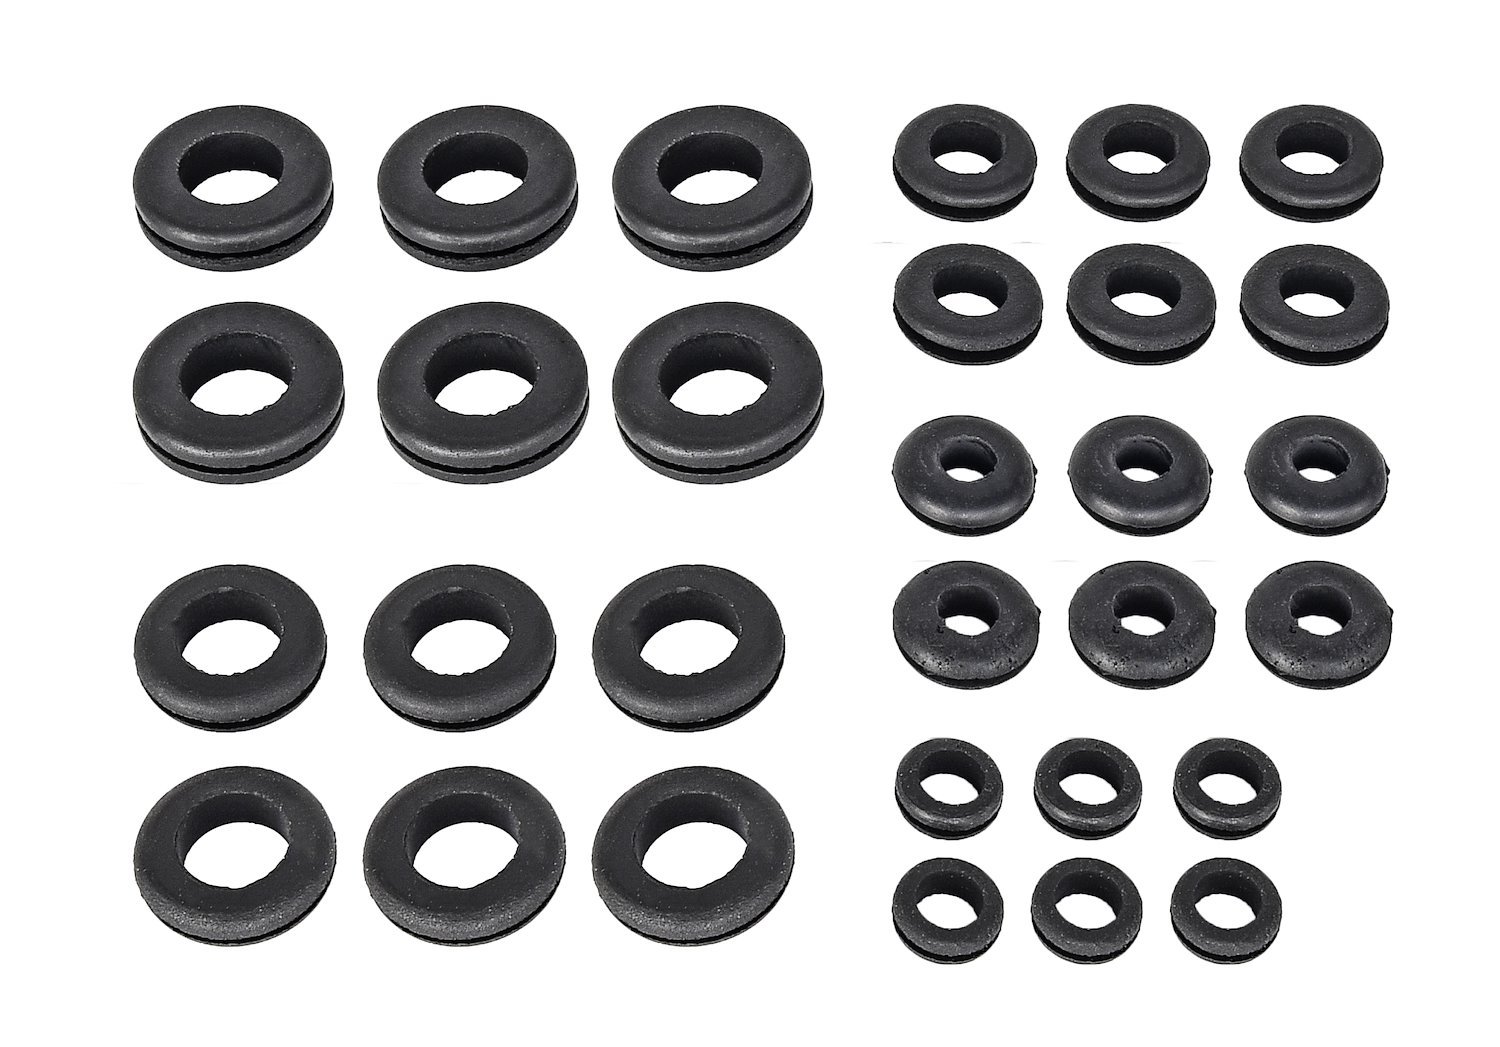 30-Piece Grommet Assortment Made in the USA